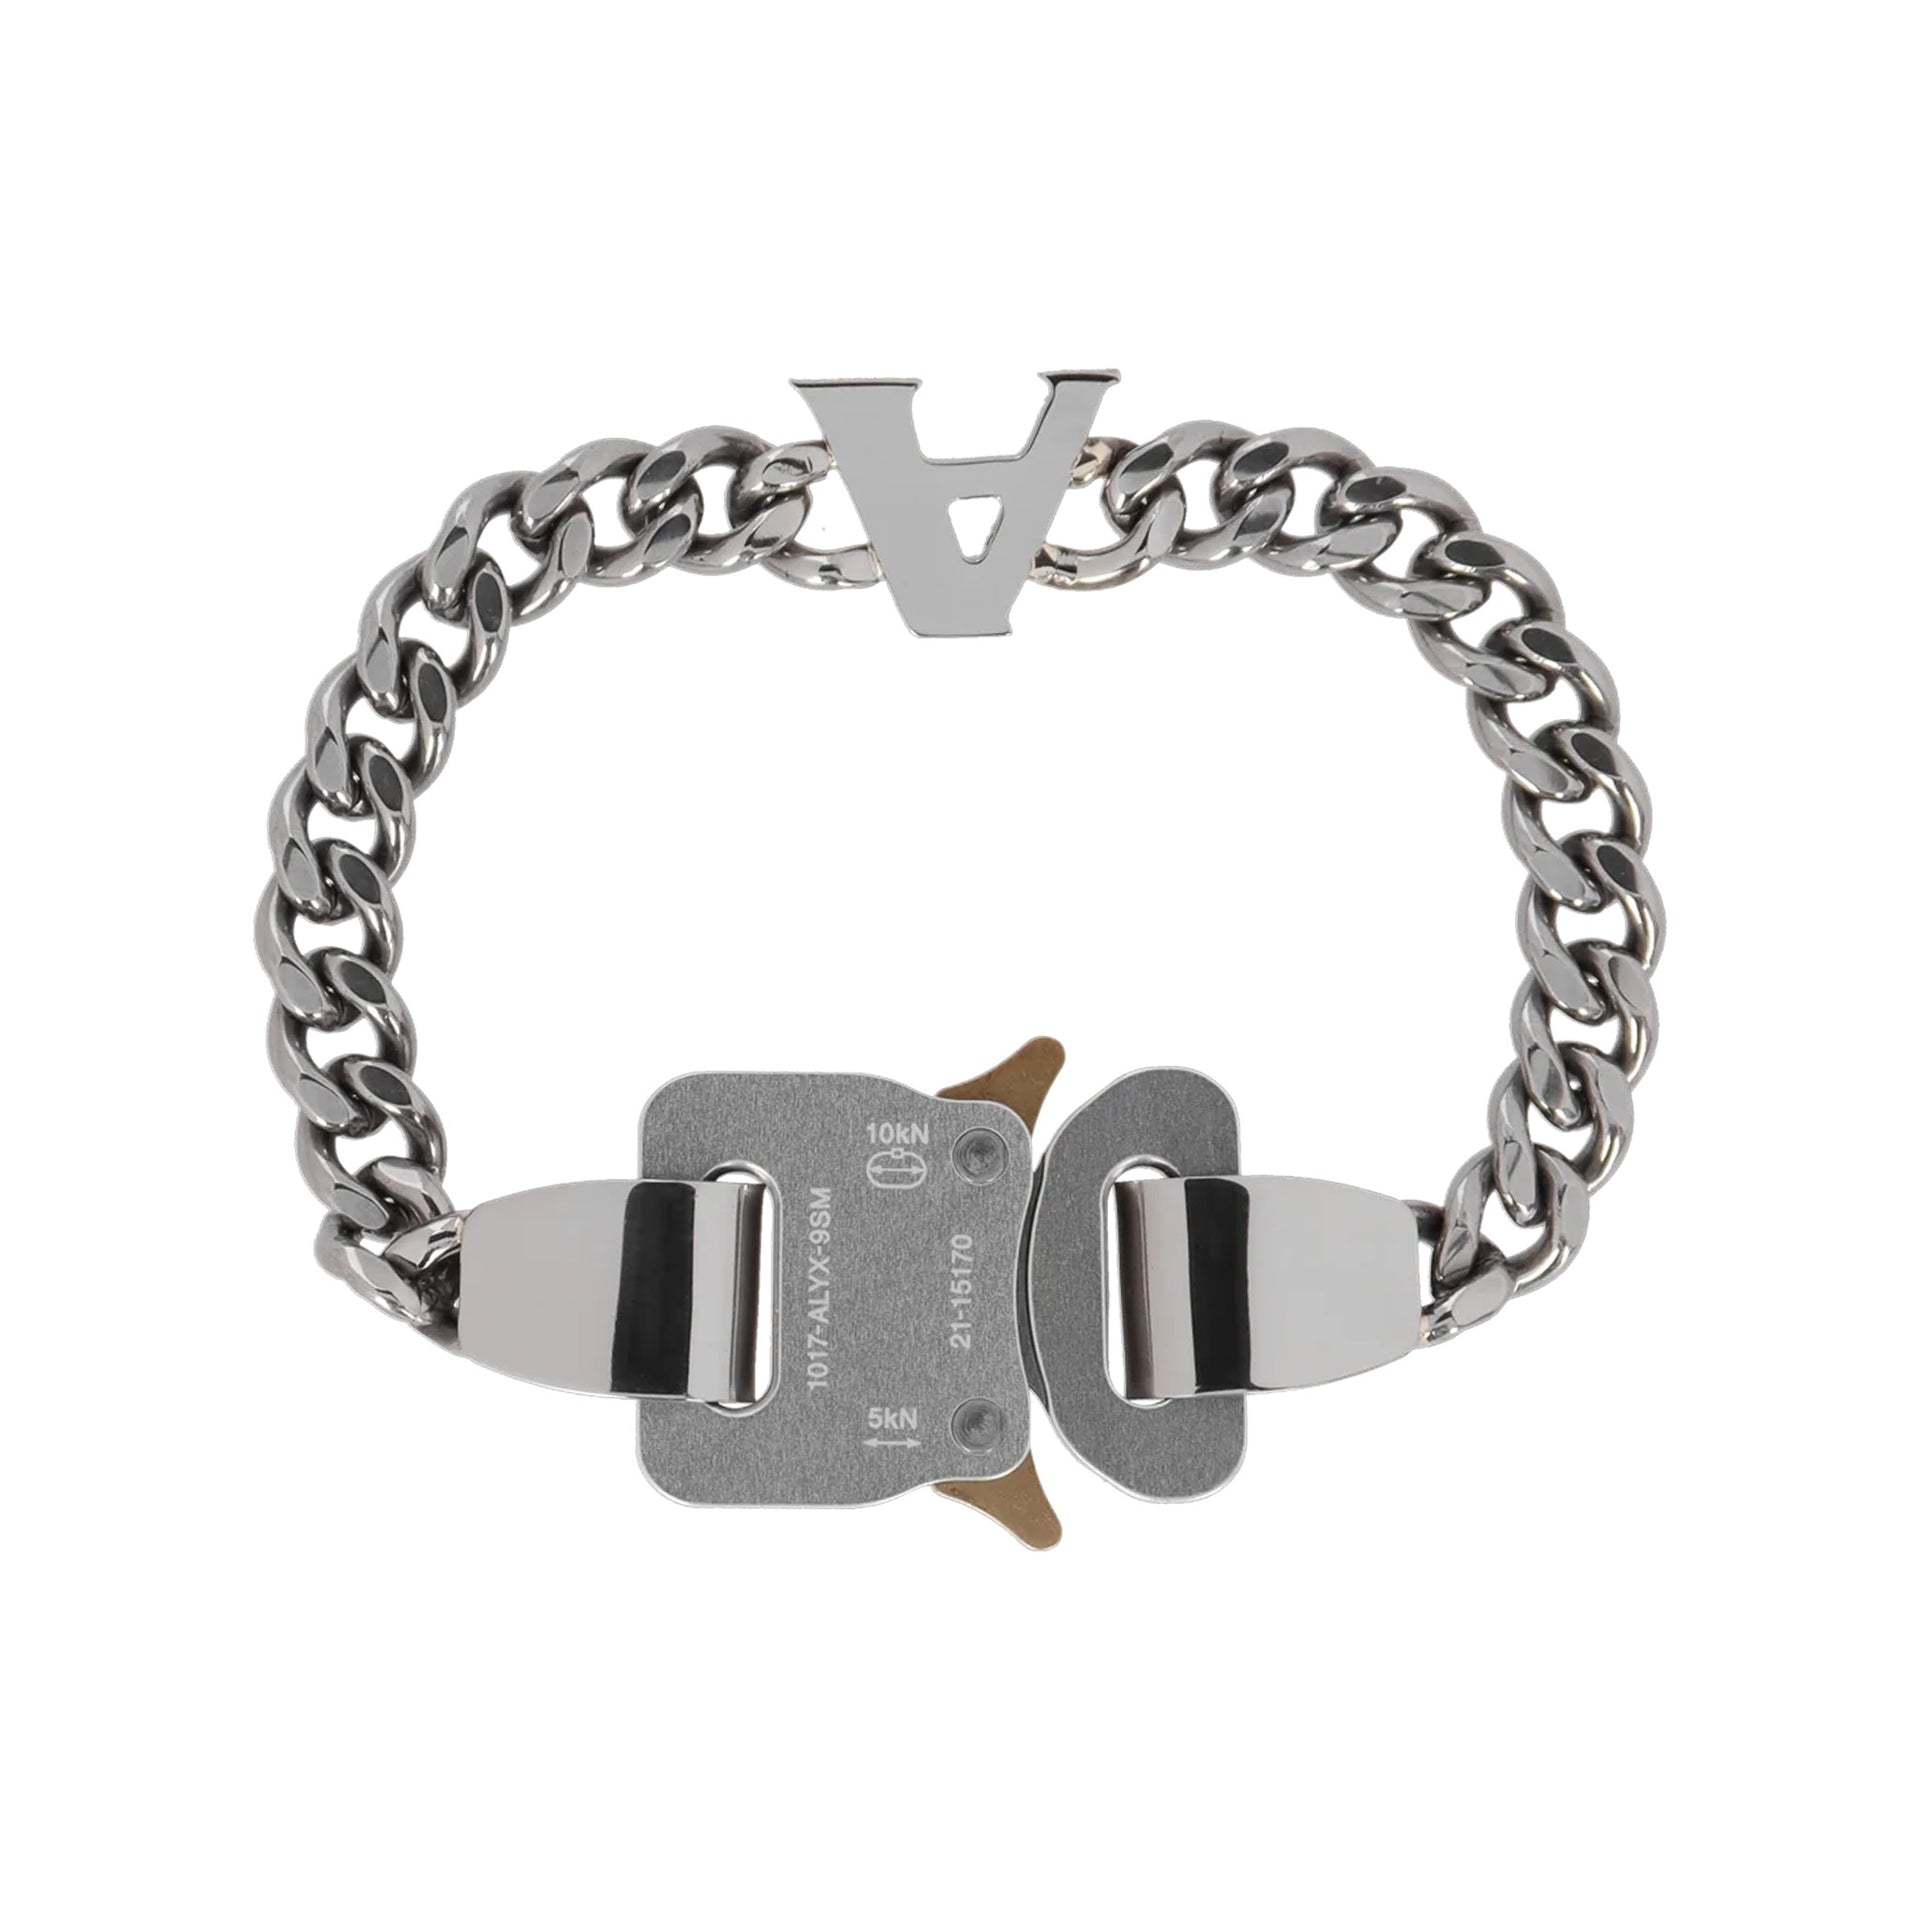 BUCKLE BRACELET WITH CHARM / GRY0002:SILVER